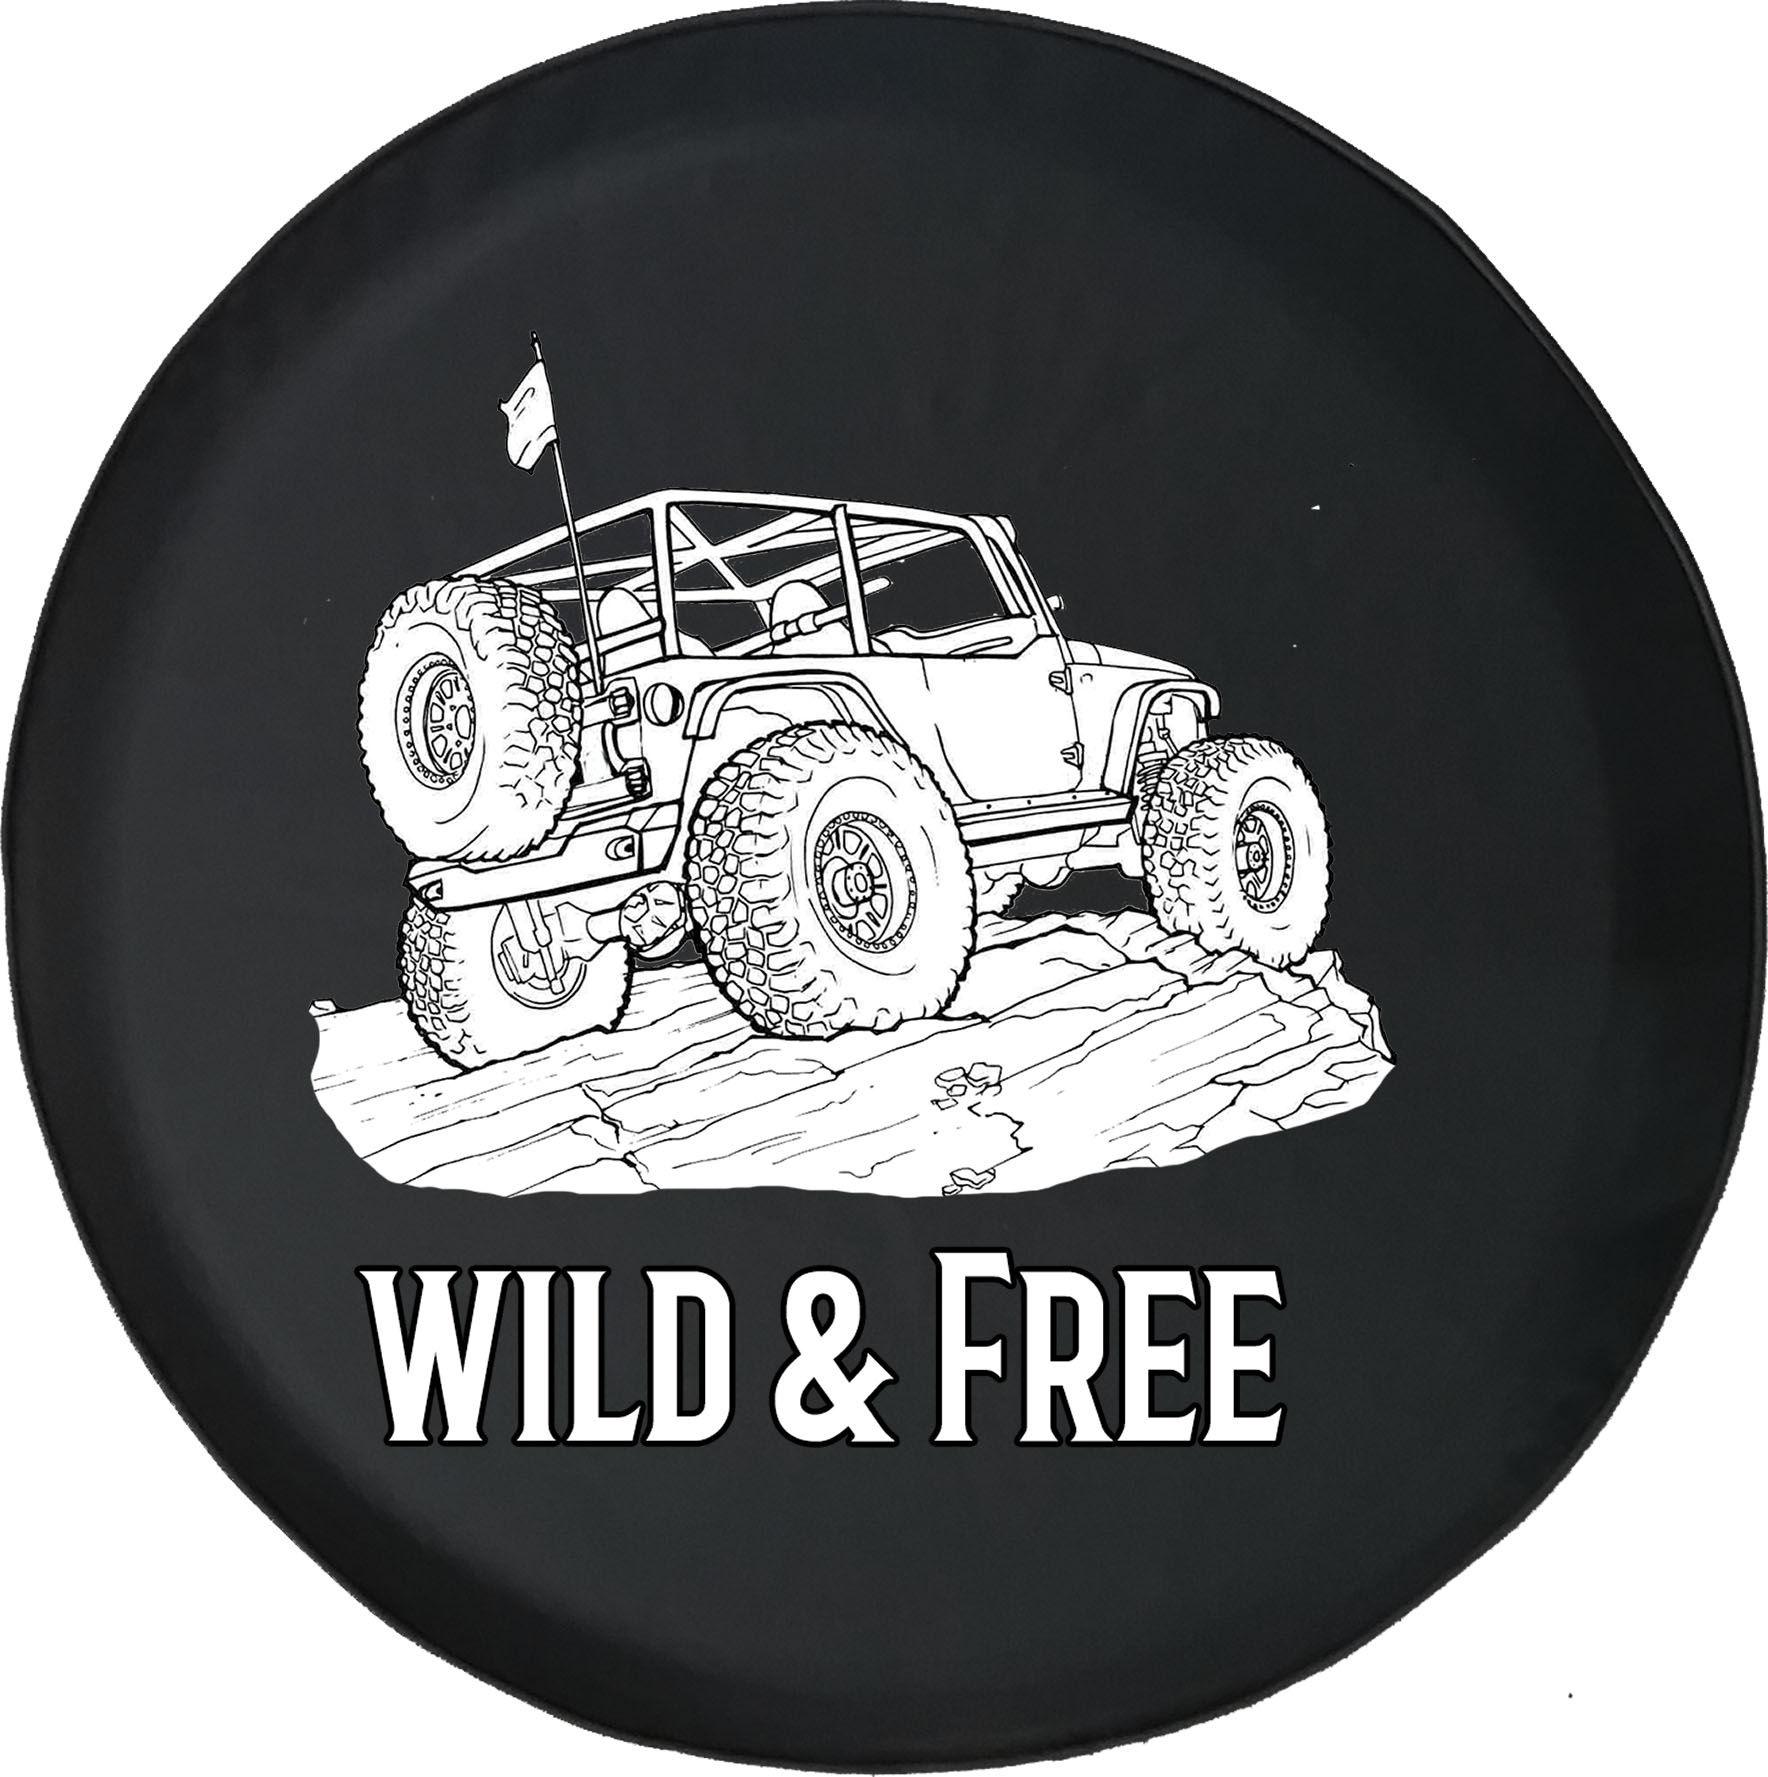 Black Tire Covers Tire Accessories for Campers, SUVs, Trailers, Trucks,  RVs and More Wild and Free Black 31 Inch